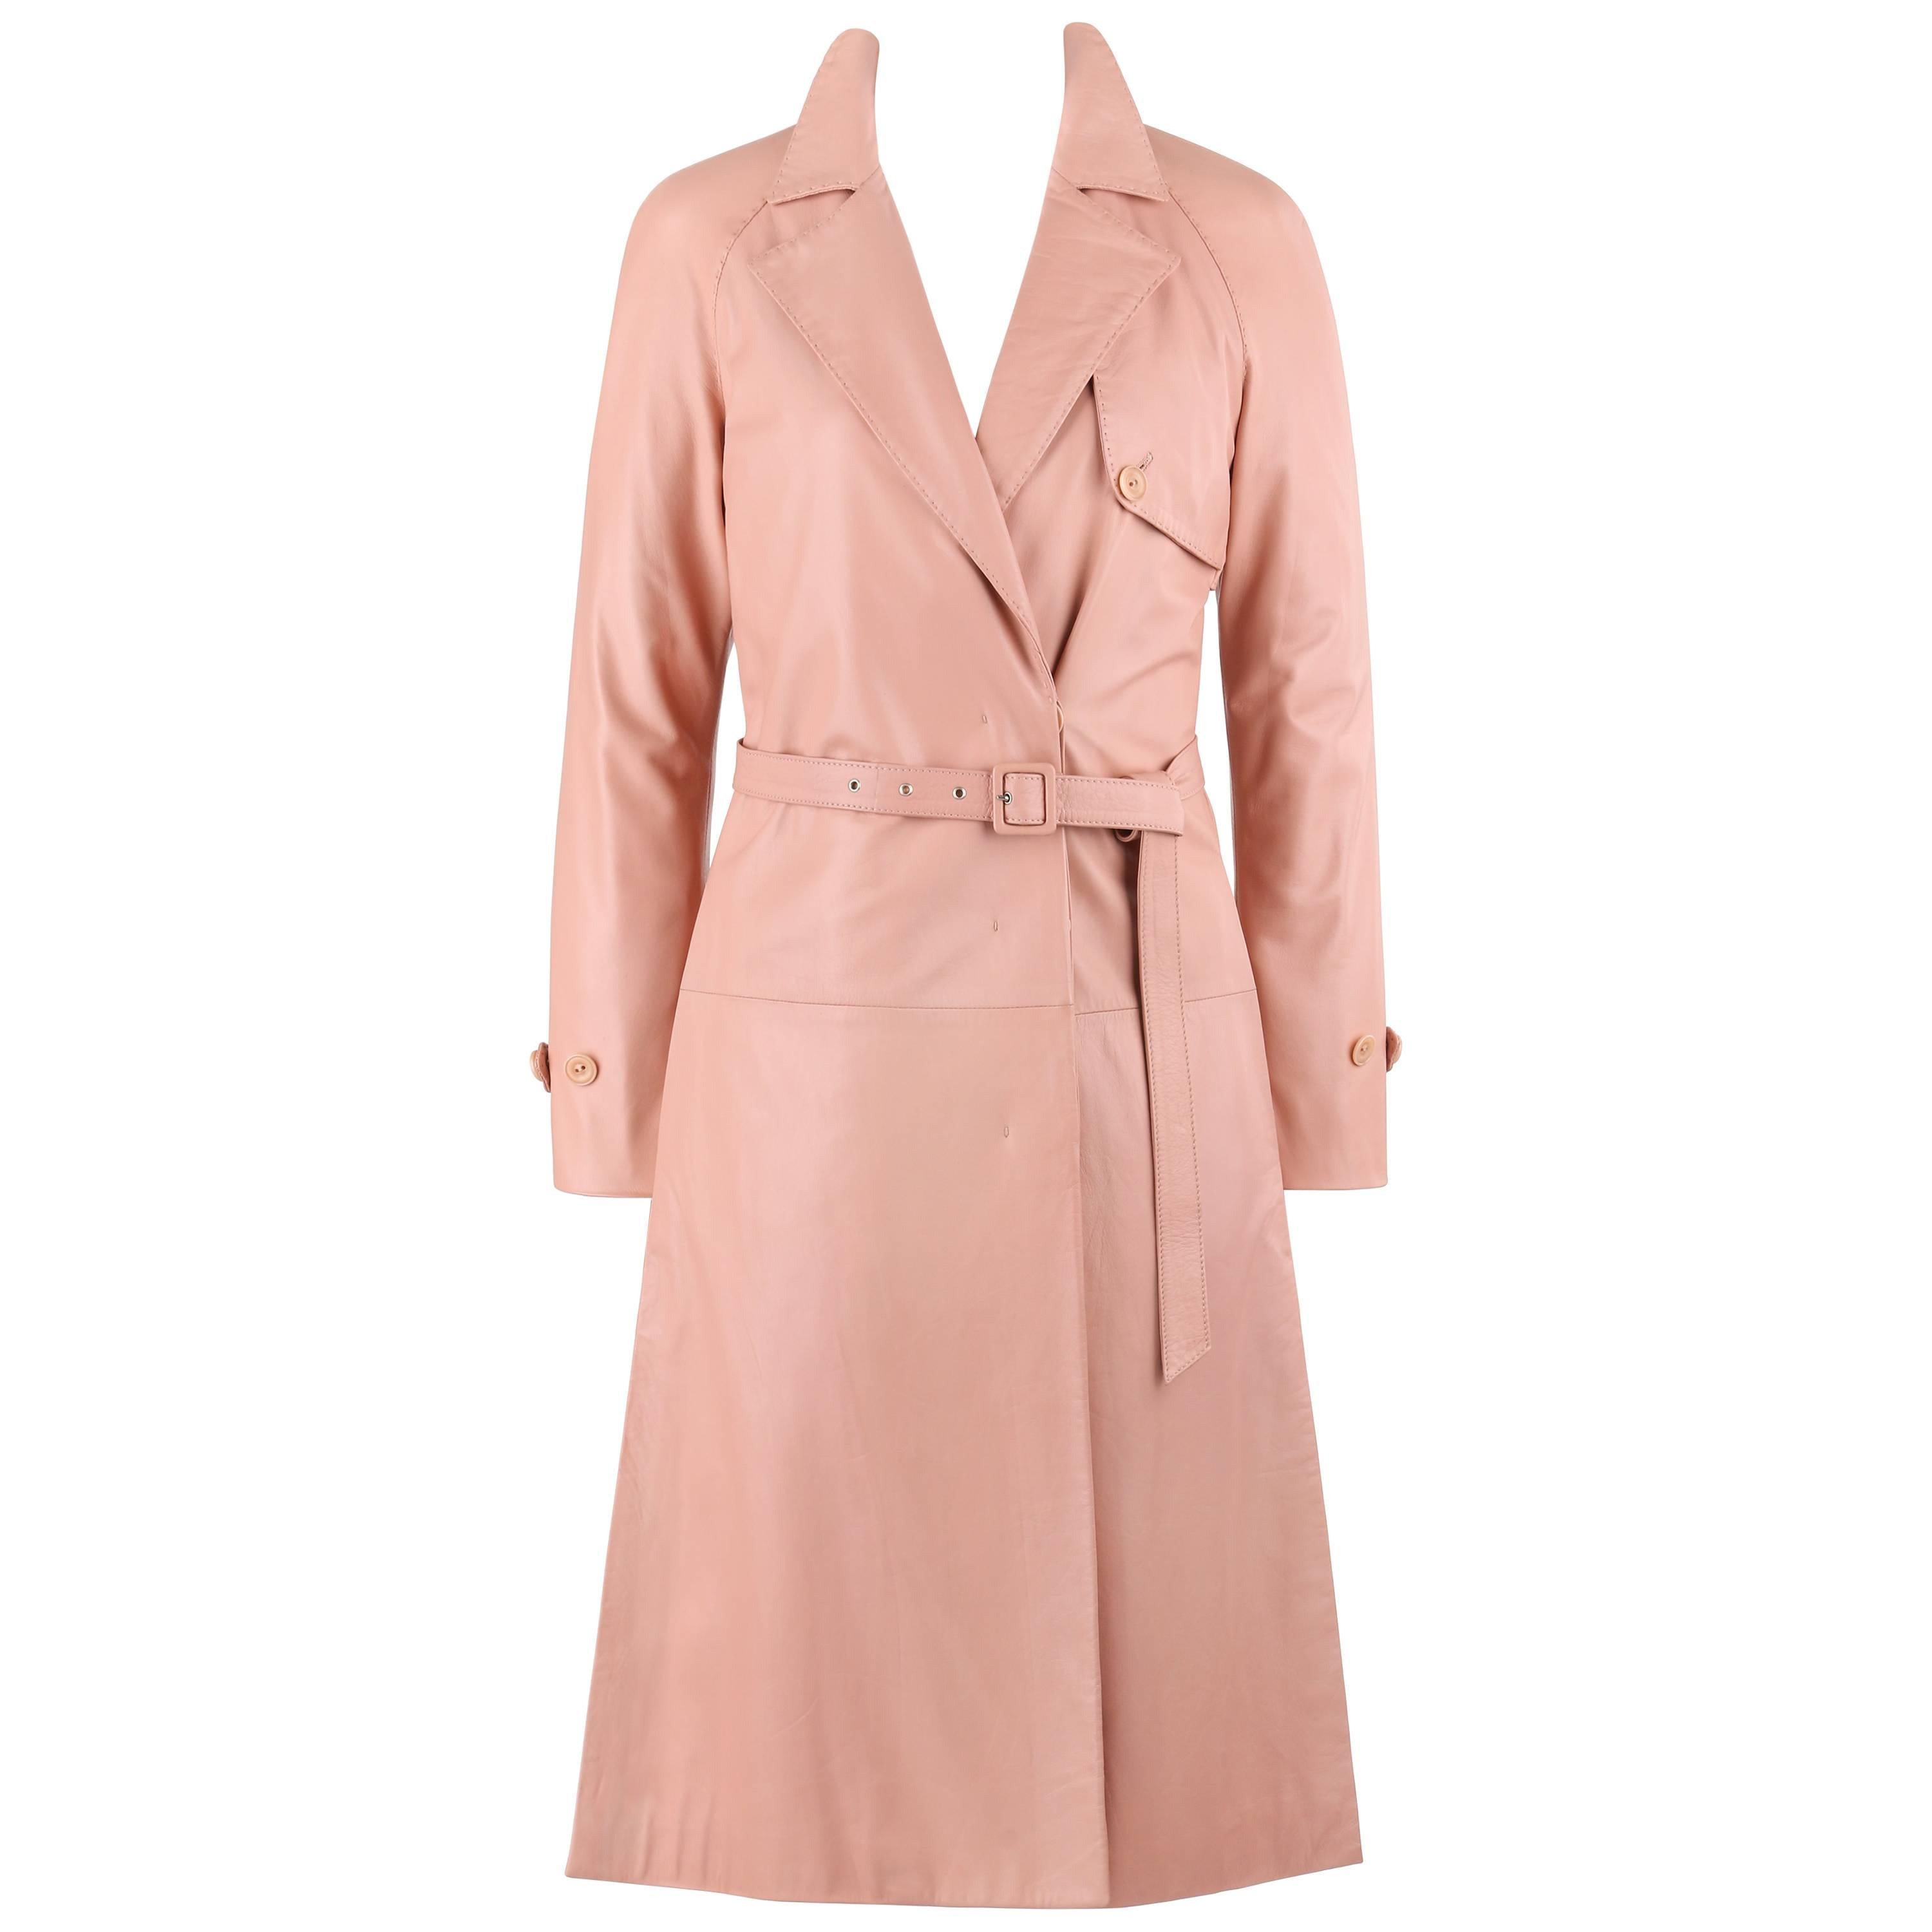 ALEXANDER McQUEEN A/W 2002 "Supercalifragilistic" Blush Pink Leather Trench Coat For Sale